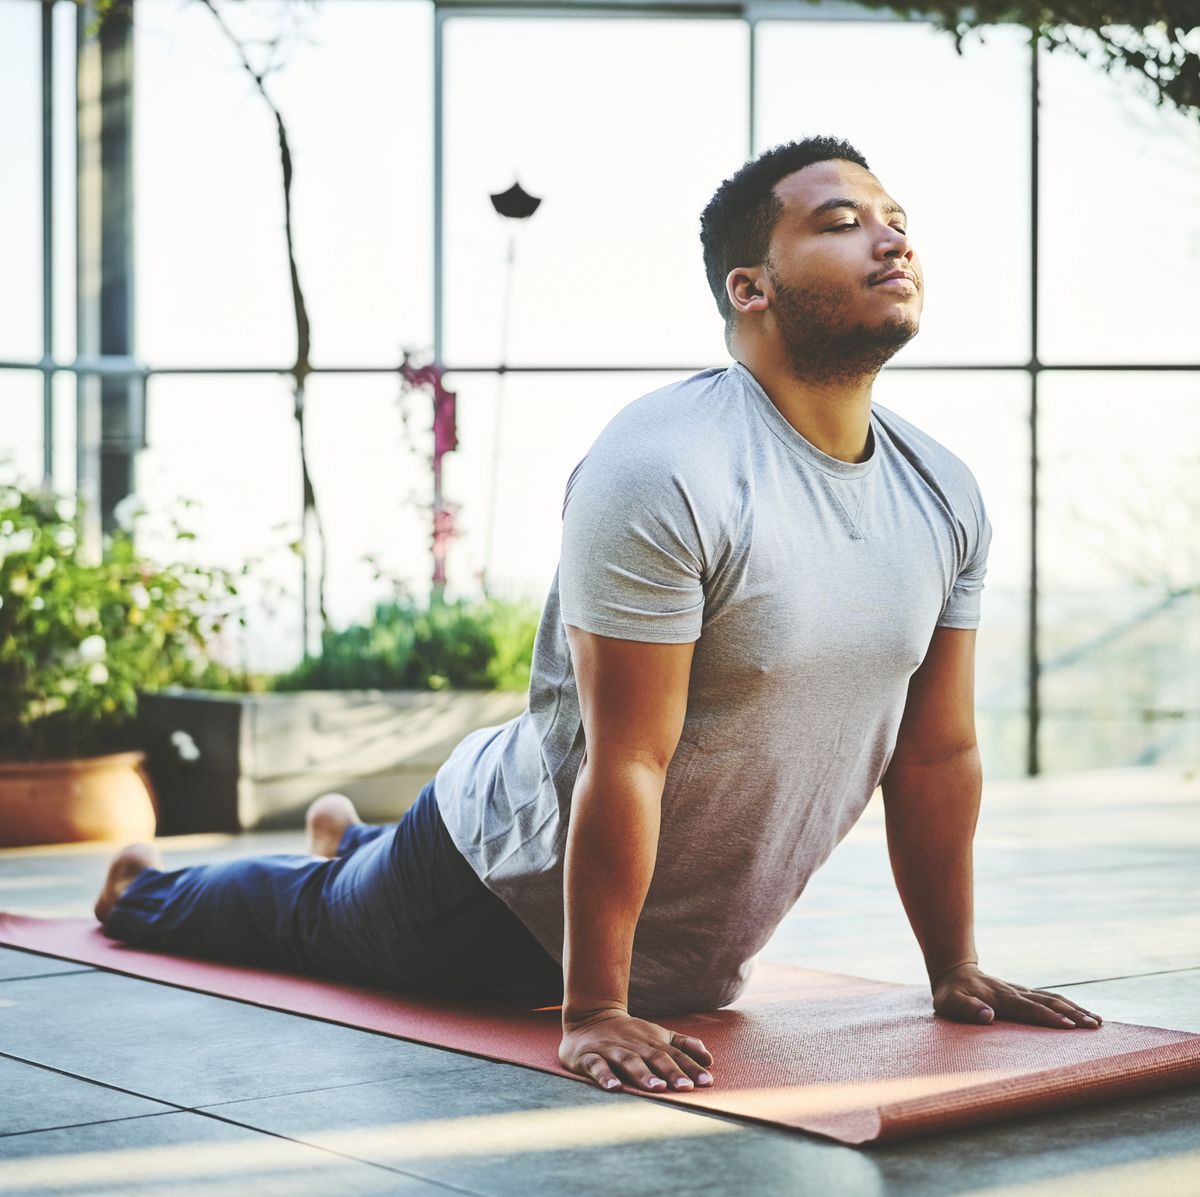 How to Practice Yoga for Weight Loss